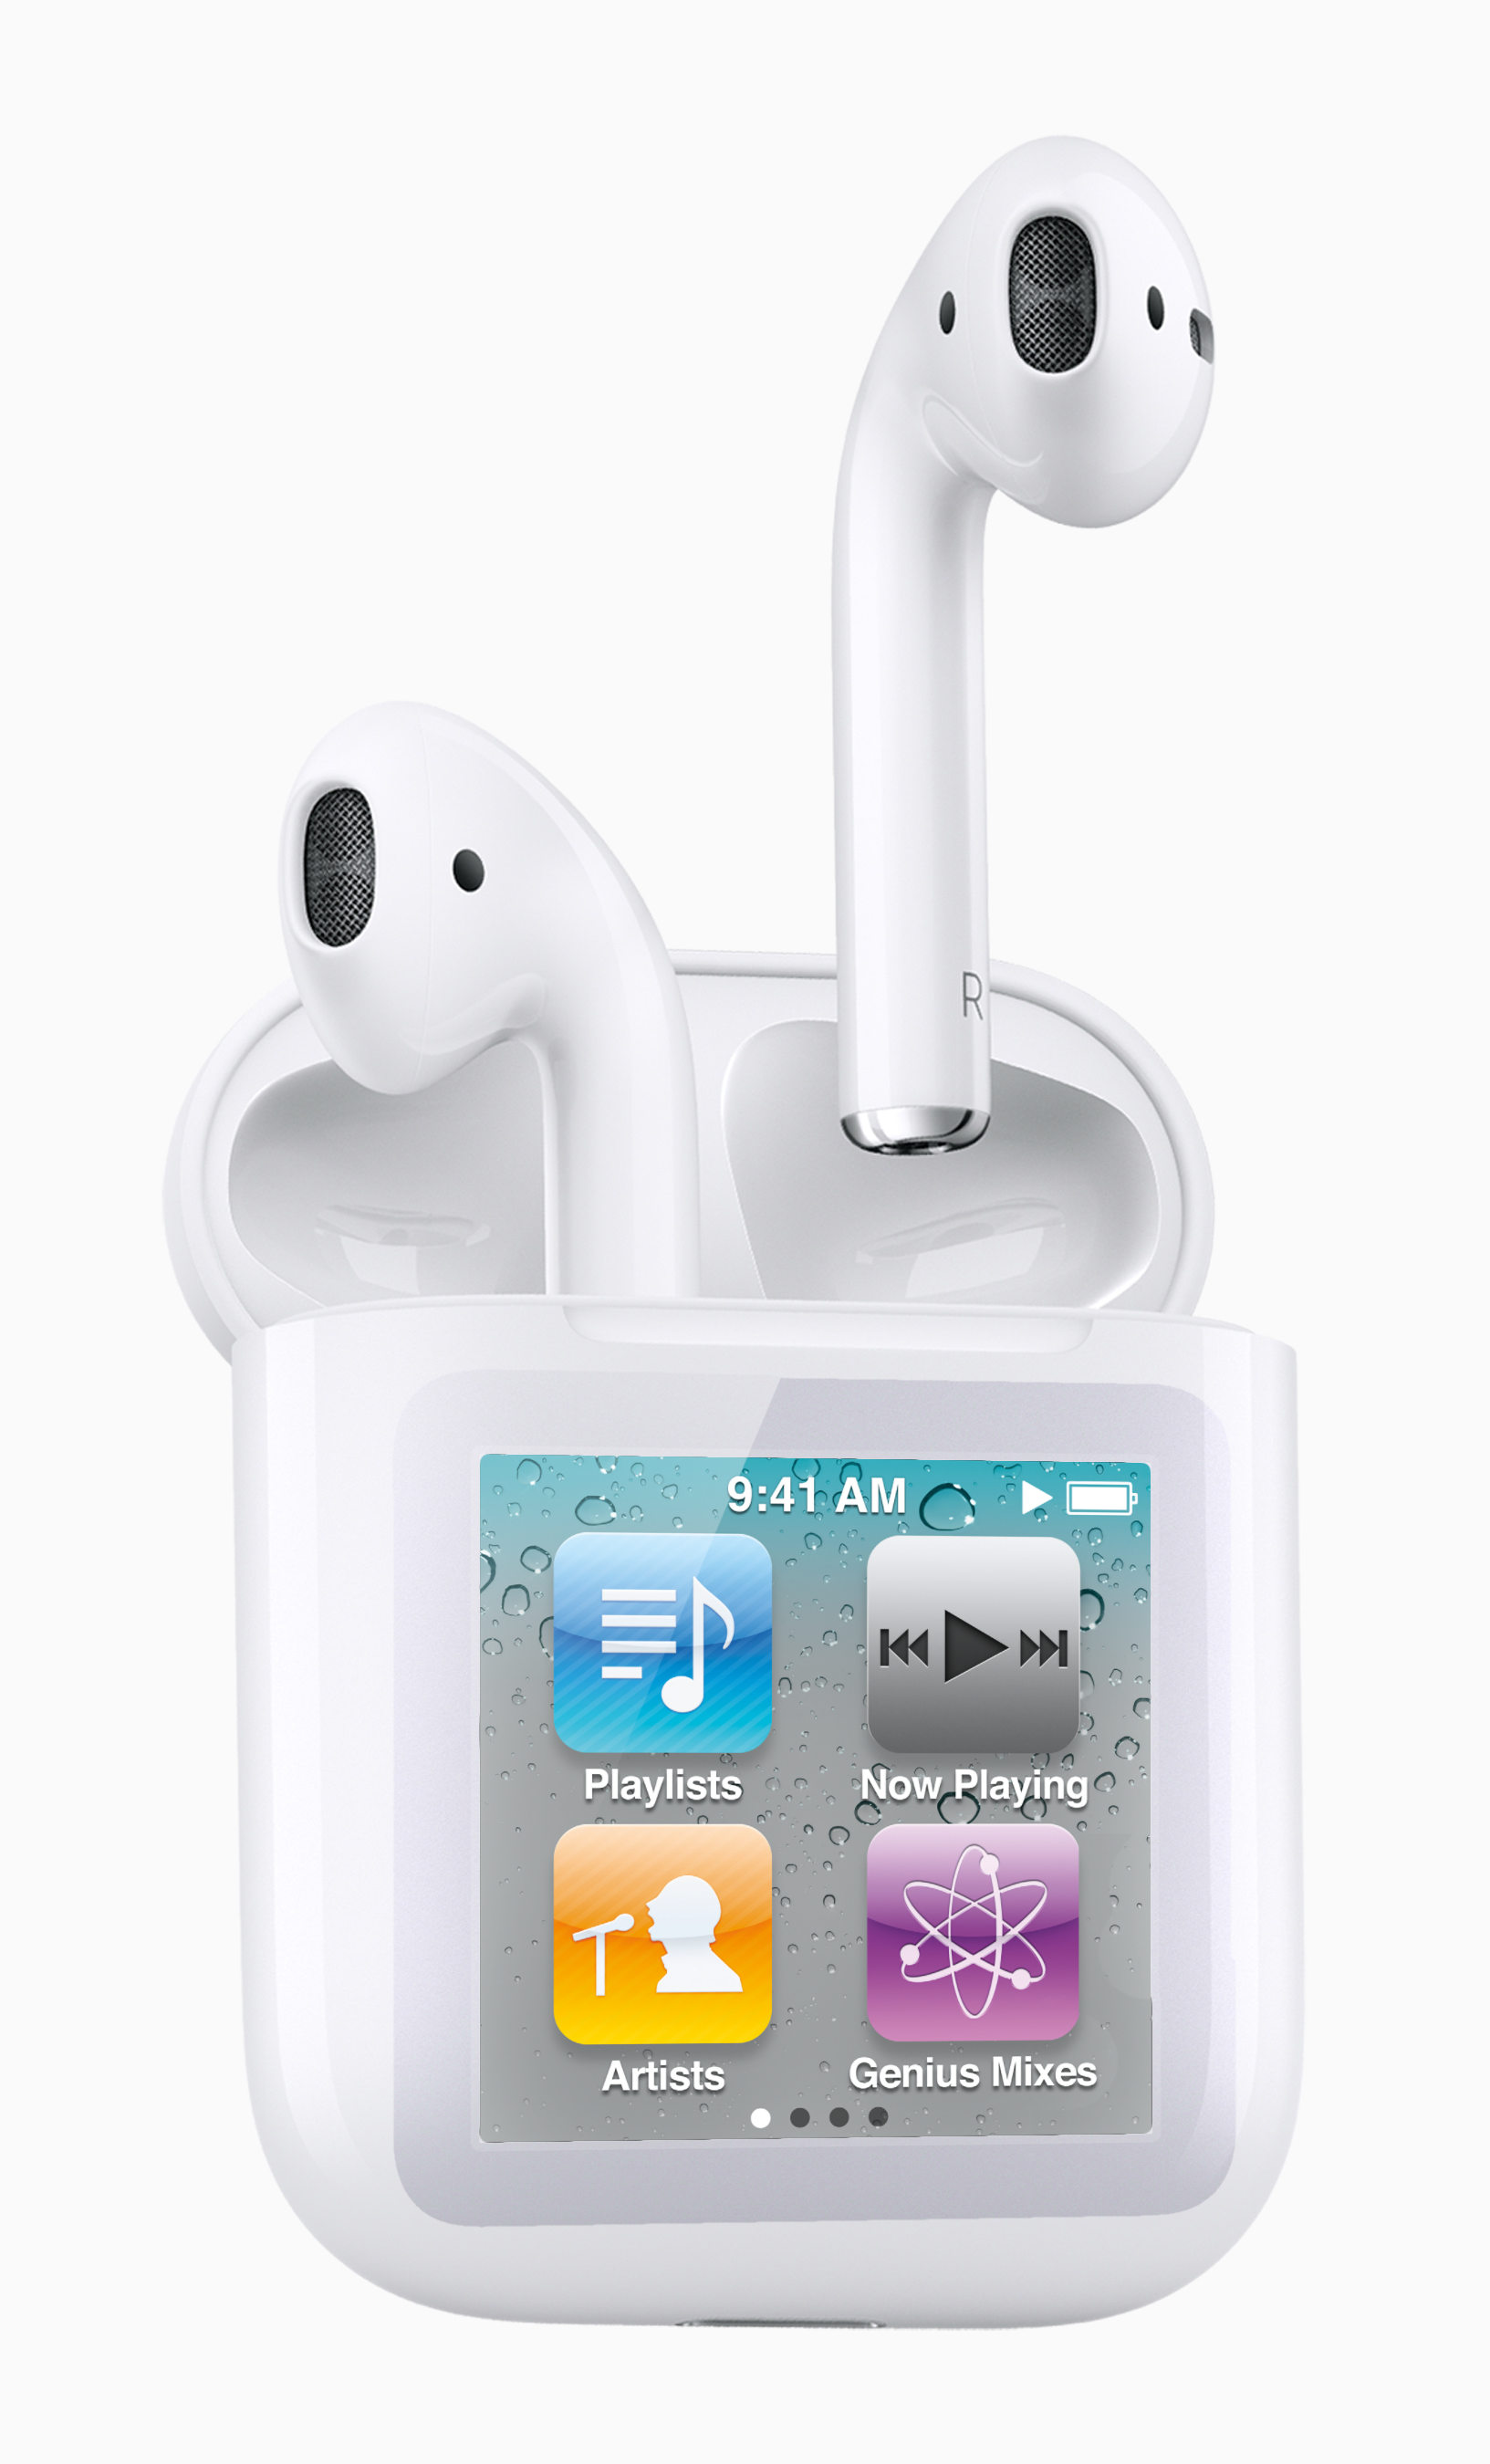 AirPods with iPod nono 6th Generation screen on the case